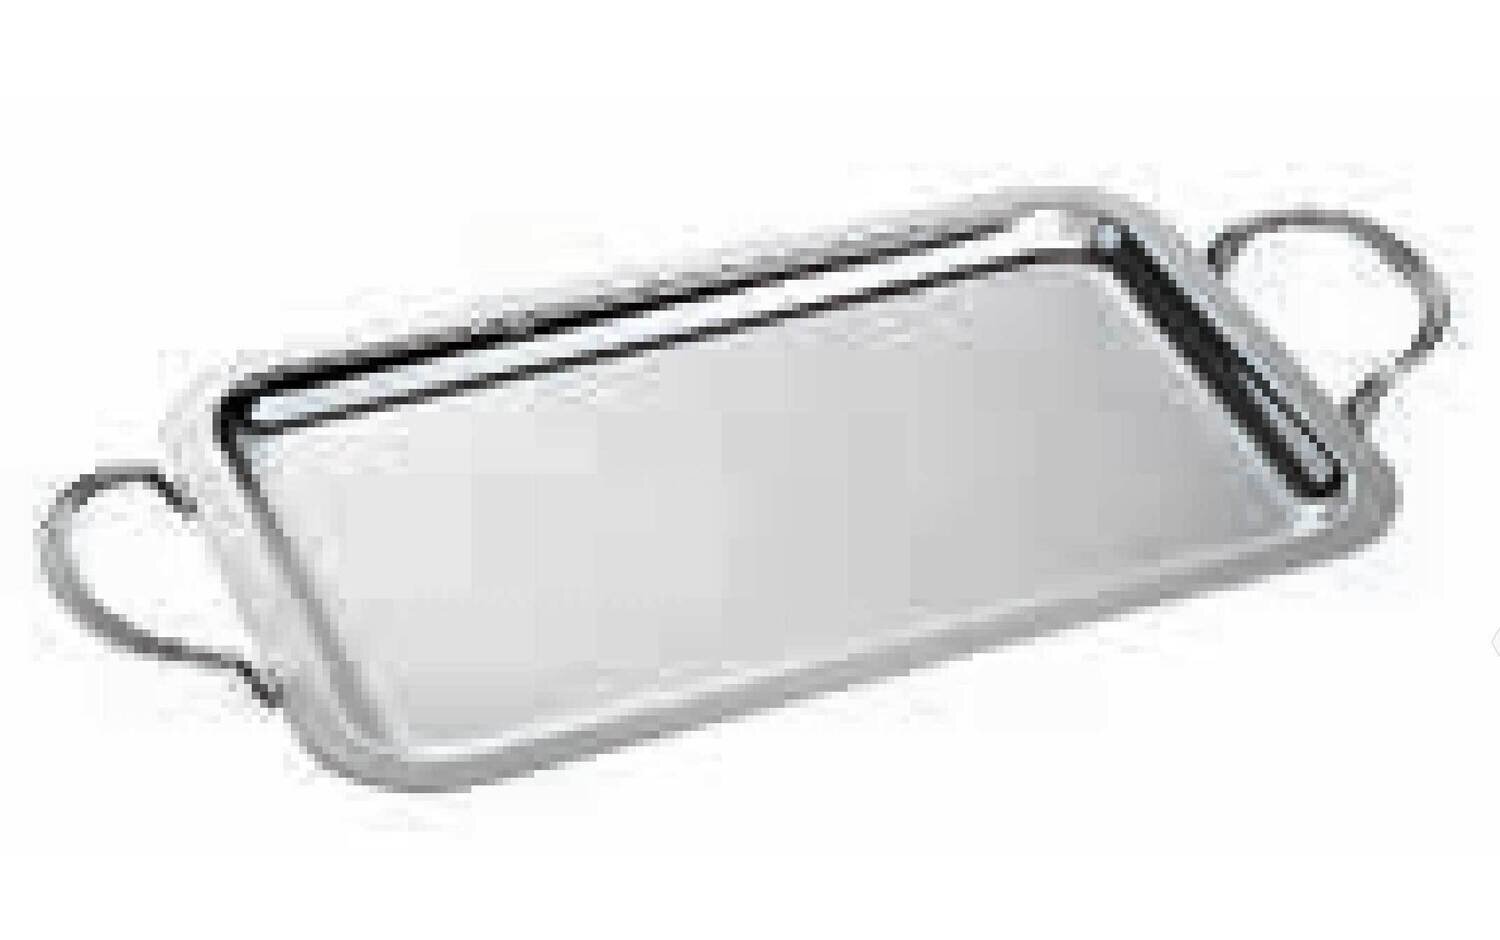 Ercuis Classique Rectangular Serving Tray With Handles 25.625 x 19.625 Inch Silver Plated F530450-65